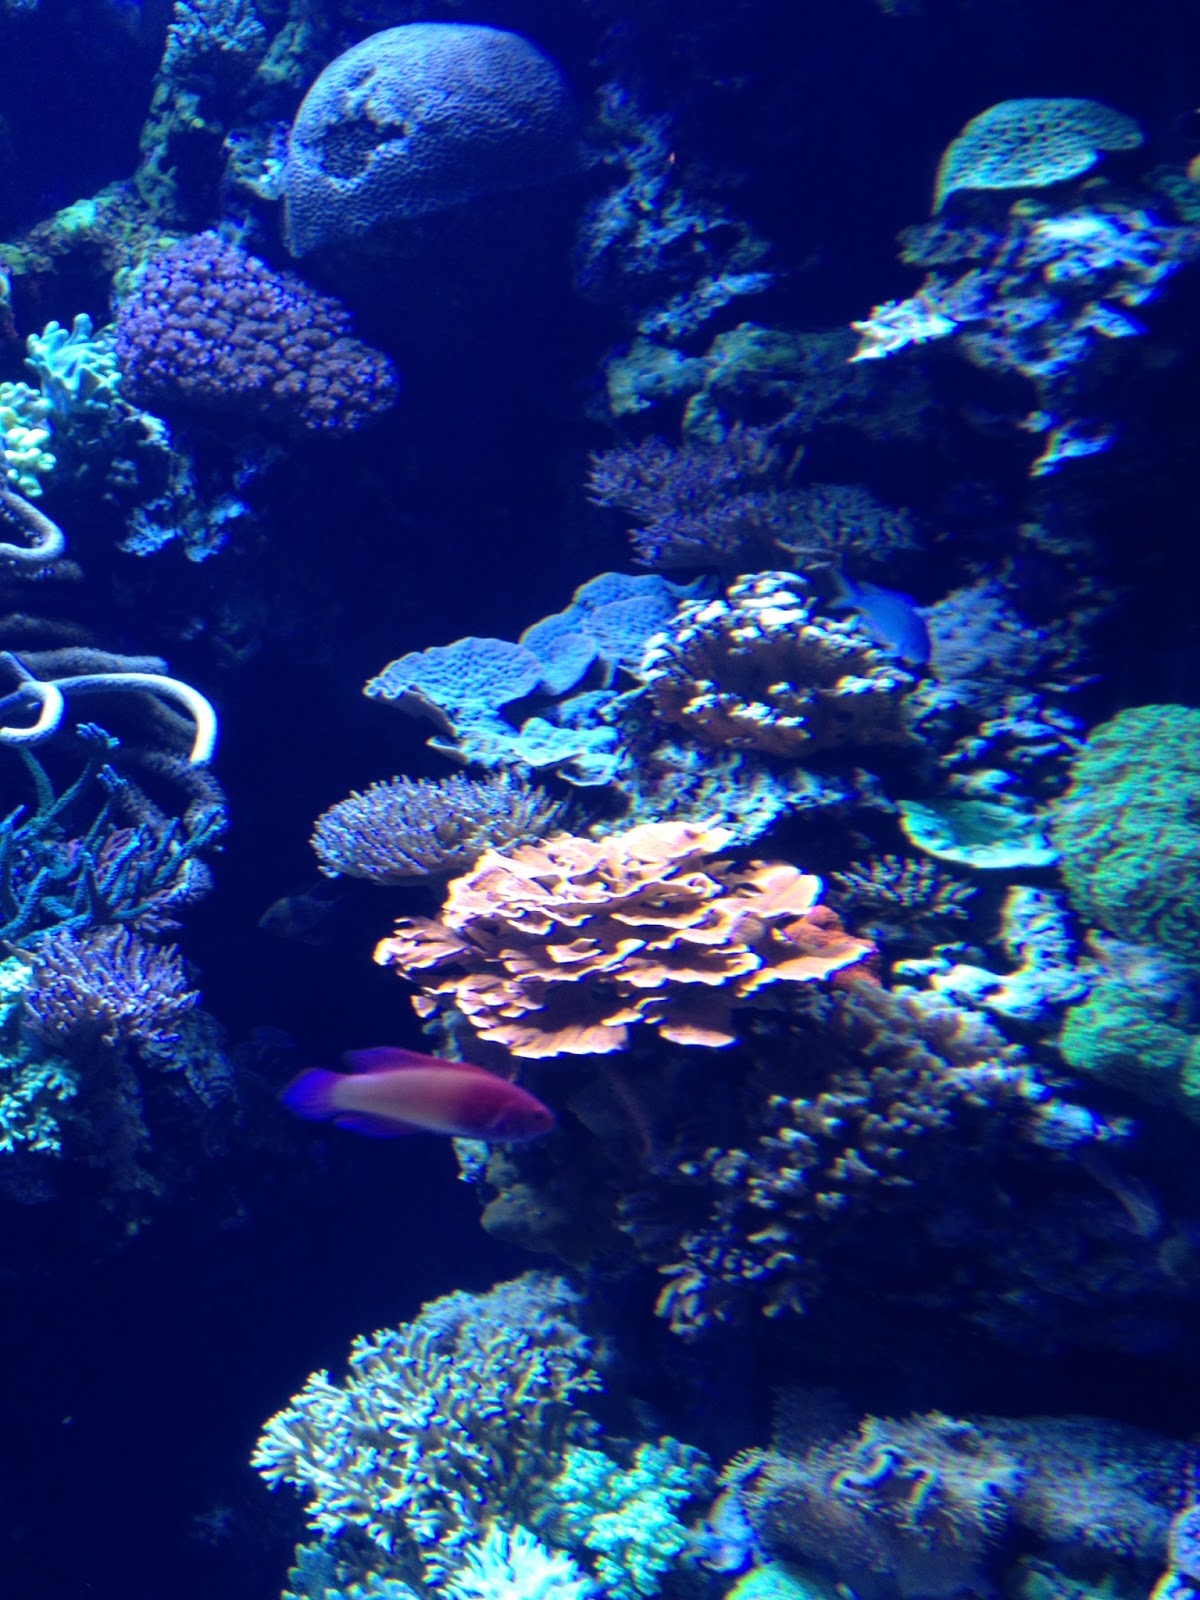 Experiencing Los Angeles: Experiencing L.A. at the Aquarium of the ...